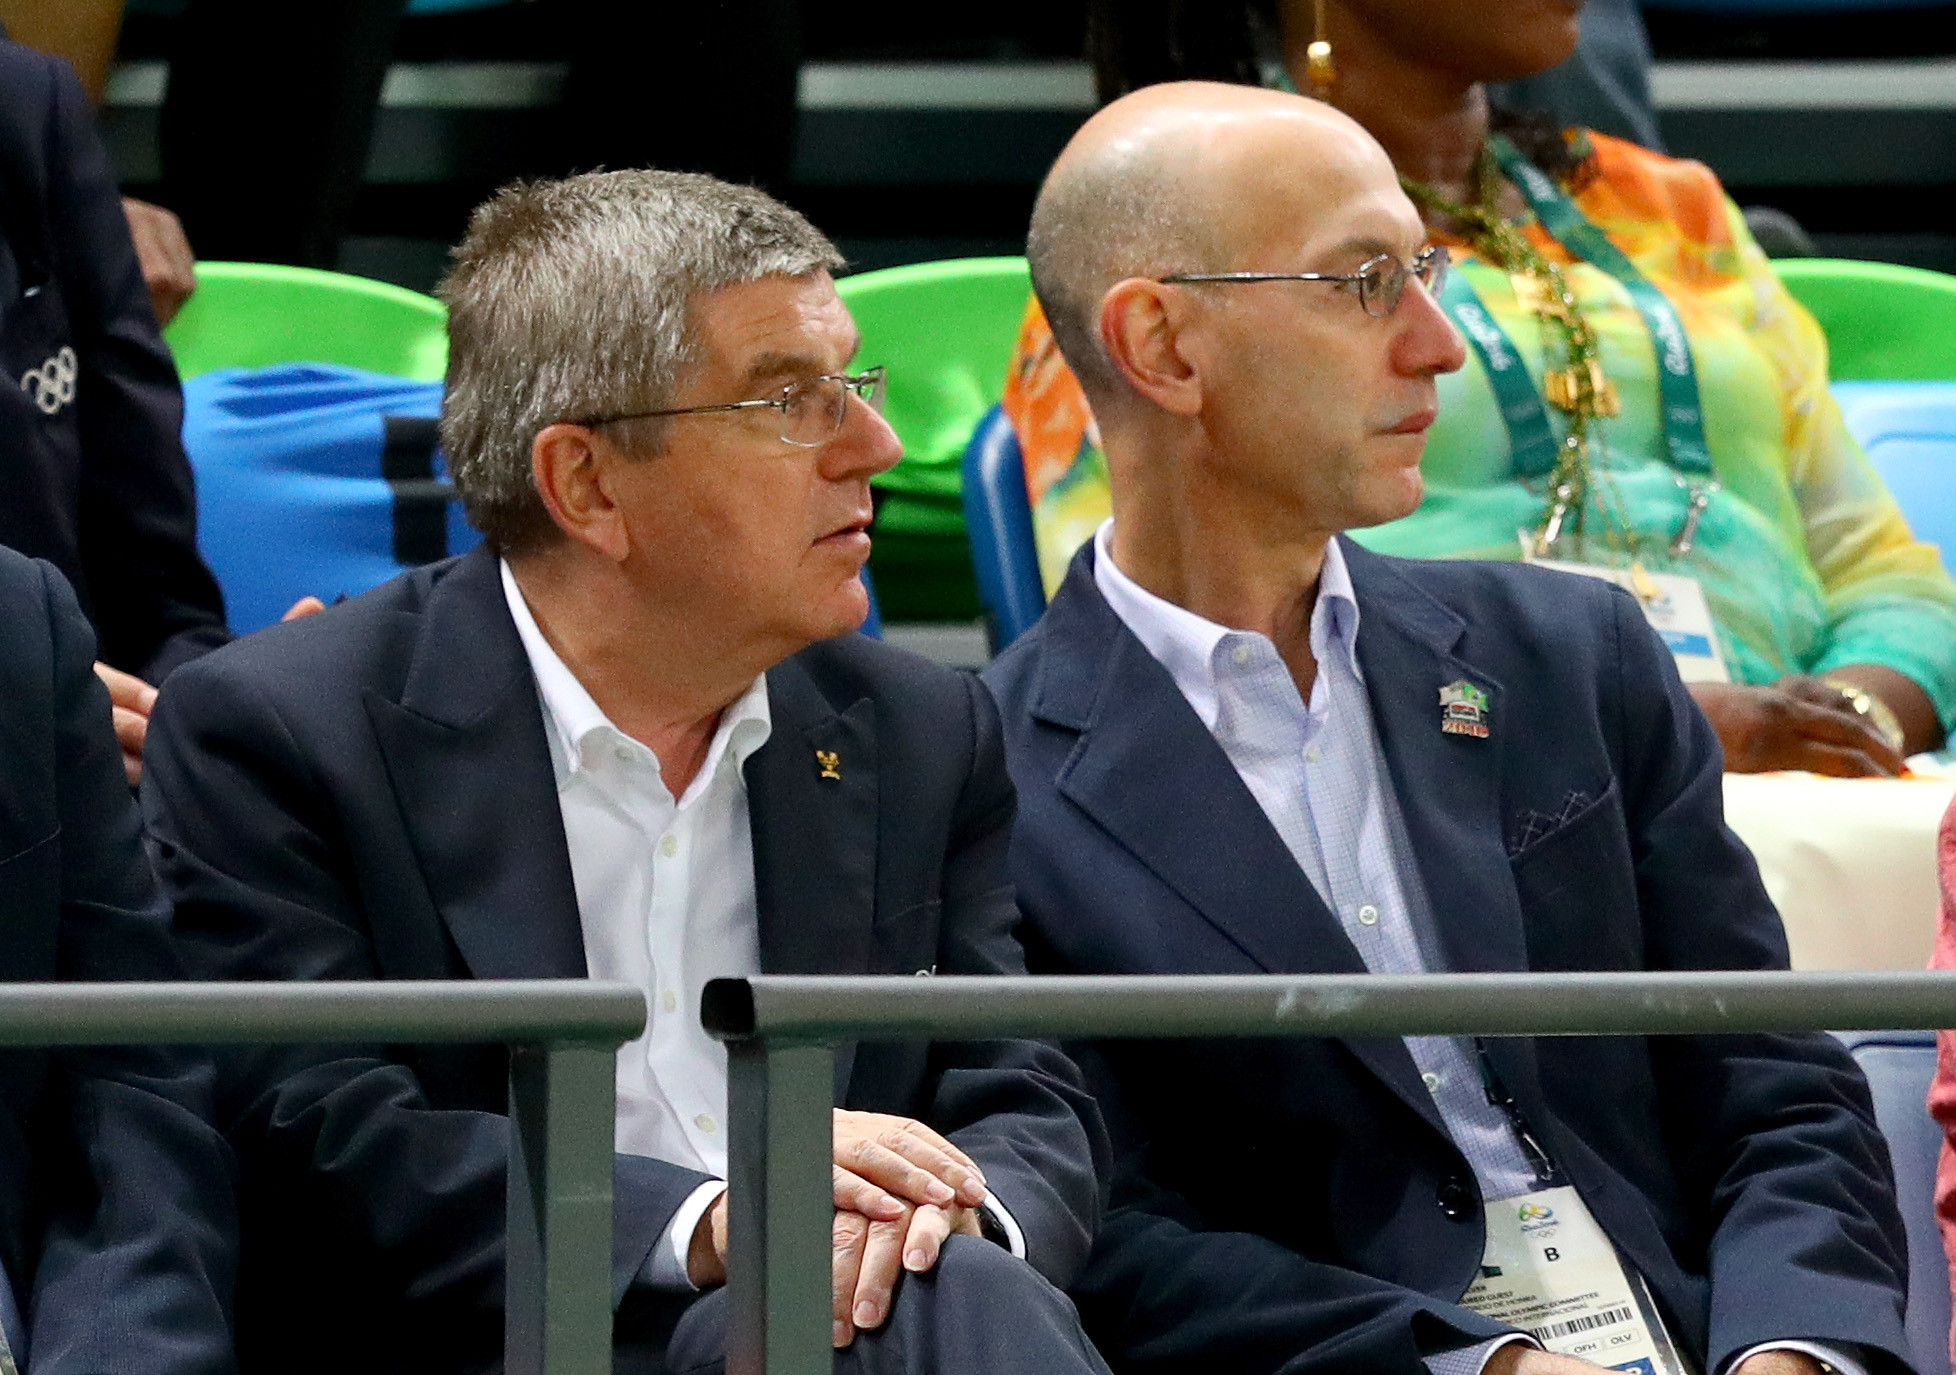 Thomas Bach, pictured here with NBA Commissioner Adam Silver,  described the decision to start the new basketball season in the United States in December as "excellent news" ©Getty Images